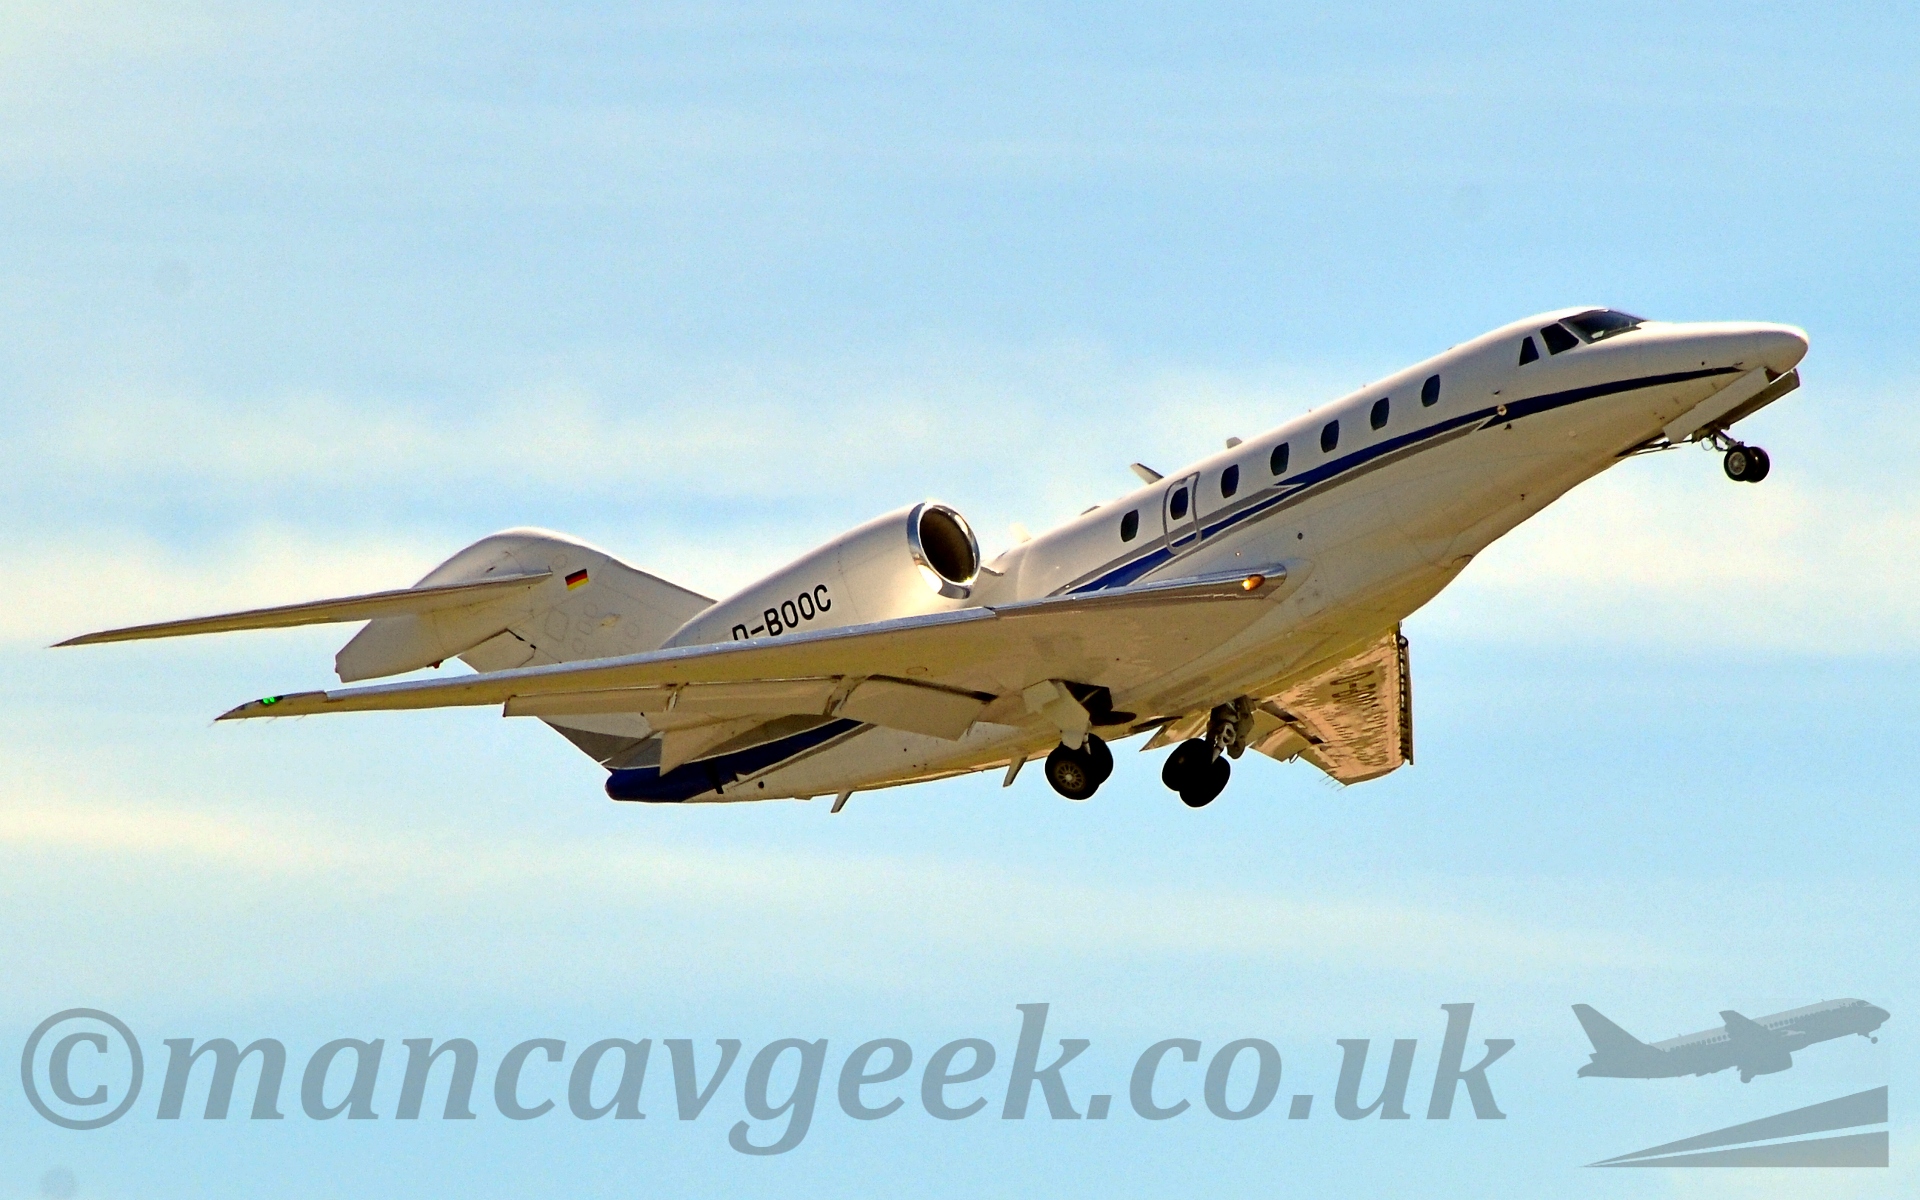 Low side view of a twin engined bizjet flying from left to right at a very low altitude, withflaps deplyed, landing gear being tucked away, and nose raised, suggesting it has just taken off. The plane is mostly white, with a blue and gresy stripe zig-zagging it's way along the fuselage and up into the base of the tail. The registration "D-Booc" is prominent of the engine cowlings, and there is a small German flag (black, red, and yellow horizontal bands) at the top of the tail. Behind, the sky is a light blue, with white clouds in the far distance.